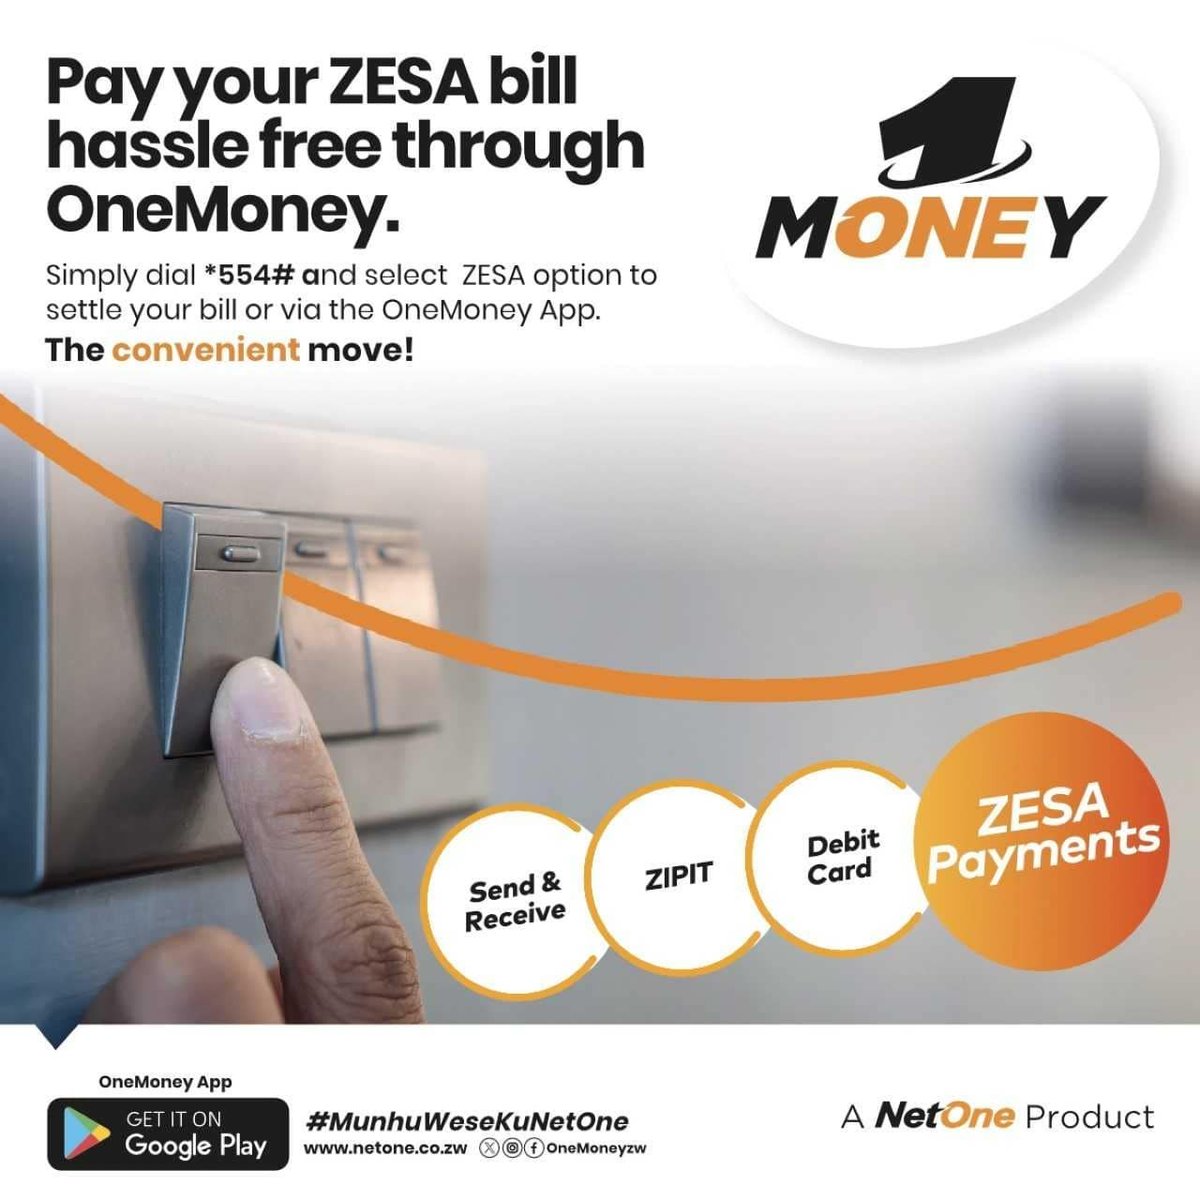 Make your ZESA payments the CONVENIENT way via ONEMONEY. Dial *554# or make use of the OneMoney Mobile App for a hassle-free ZESA purchase. #OneMoney #TheConvenientMove